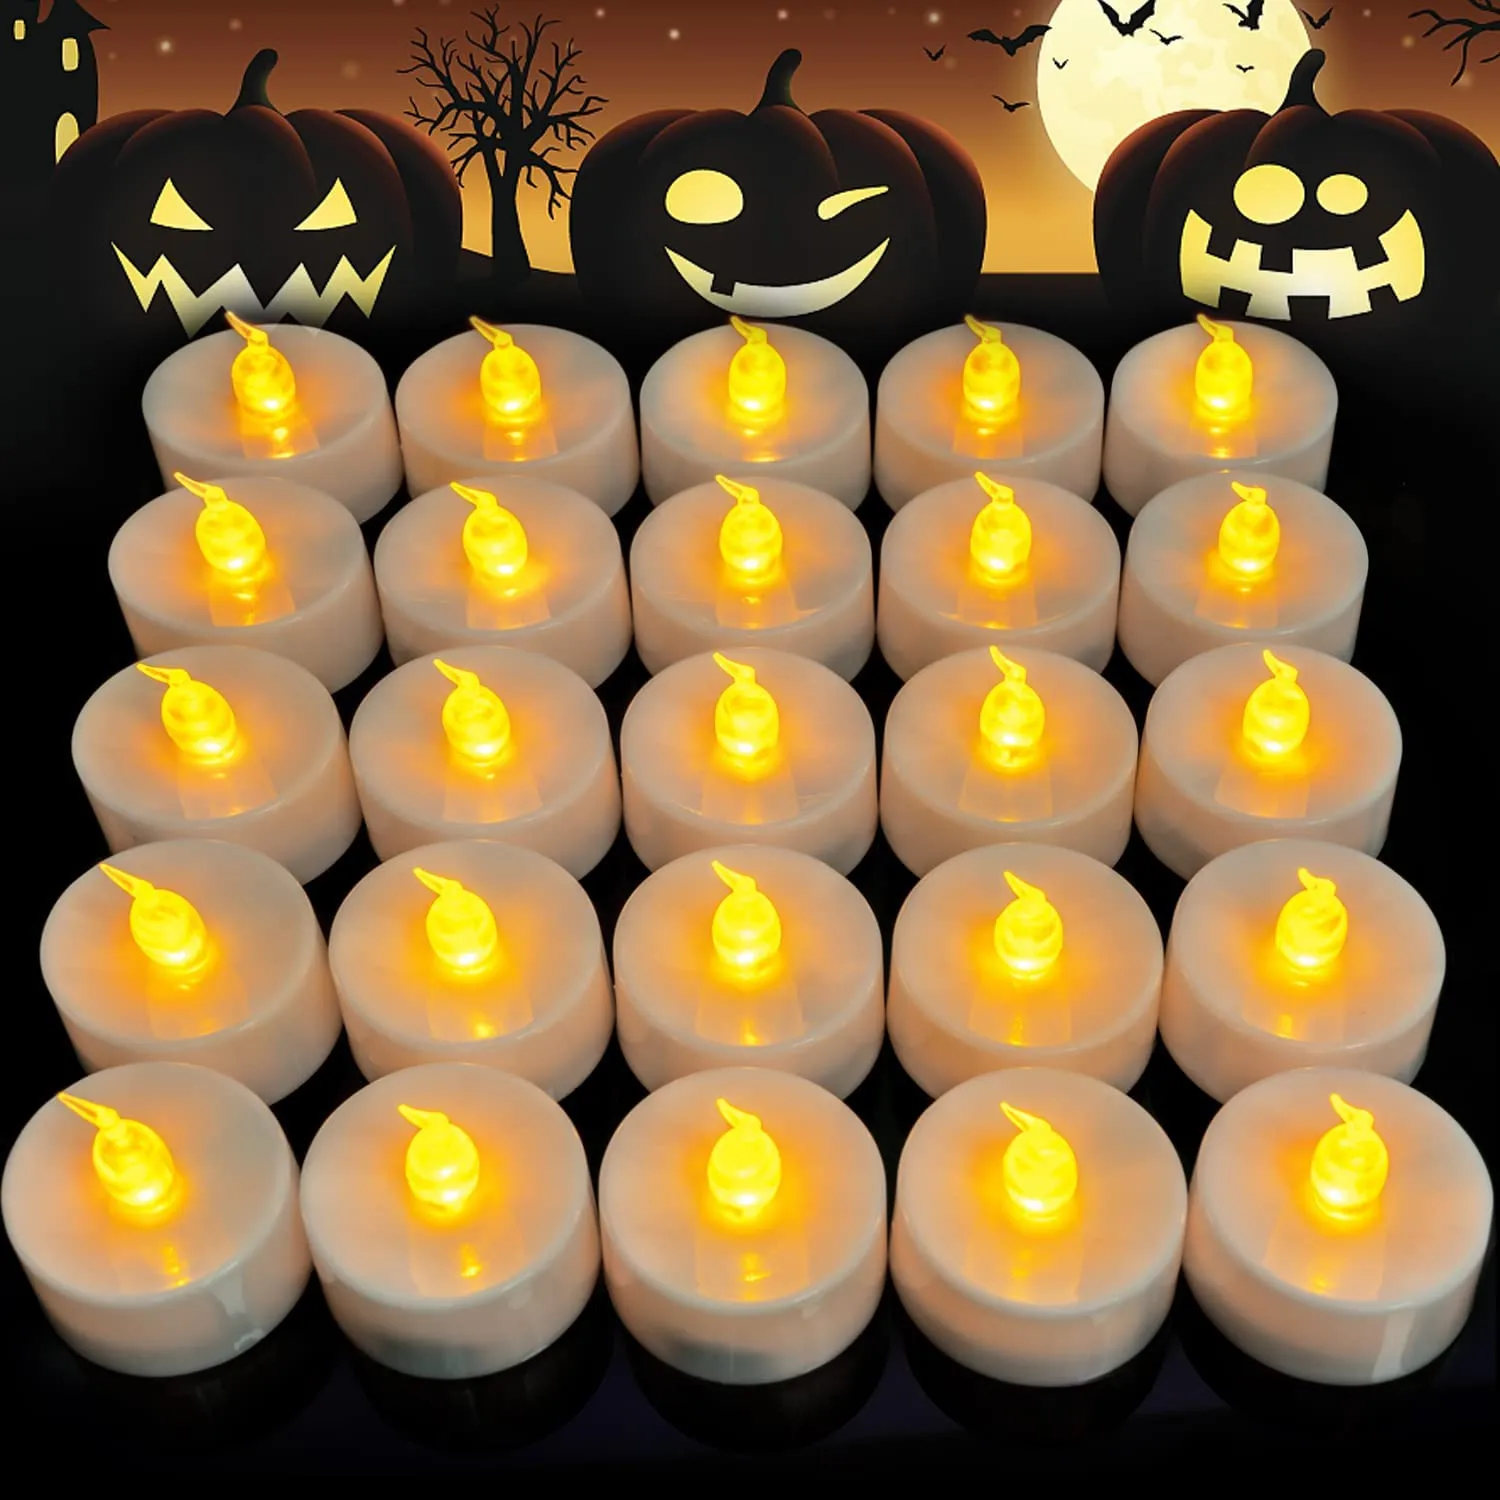 LED Tealight Candles,Flickering Bright Battery Candles Operated Candles Flameless Batteries Included